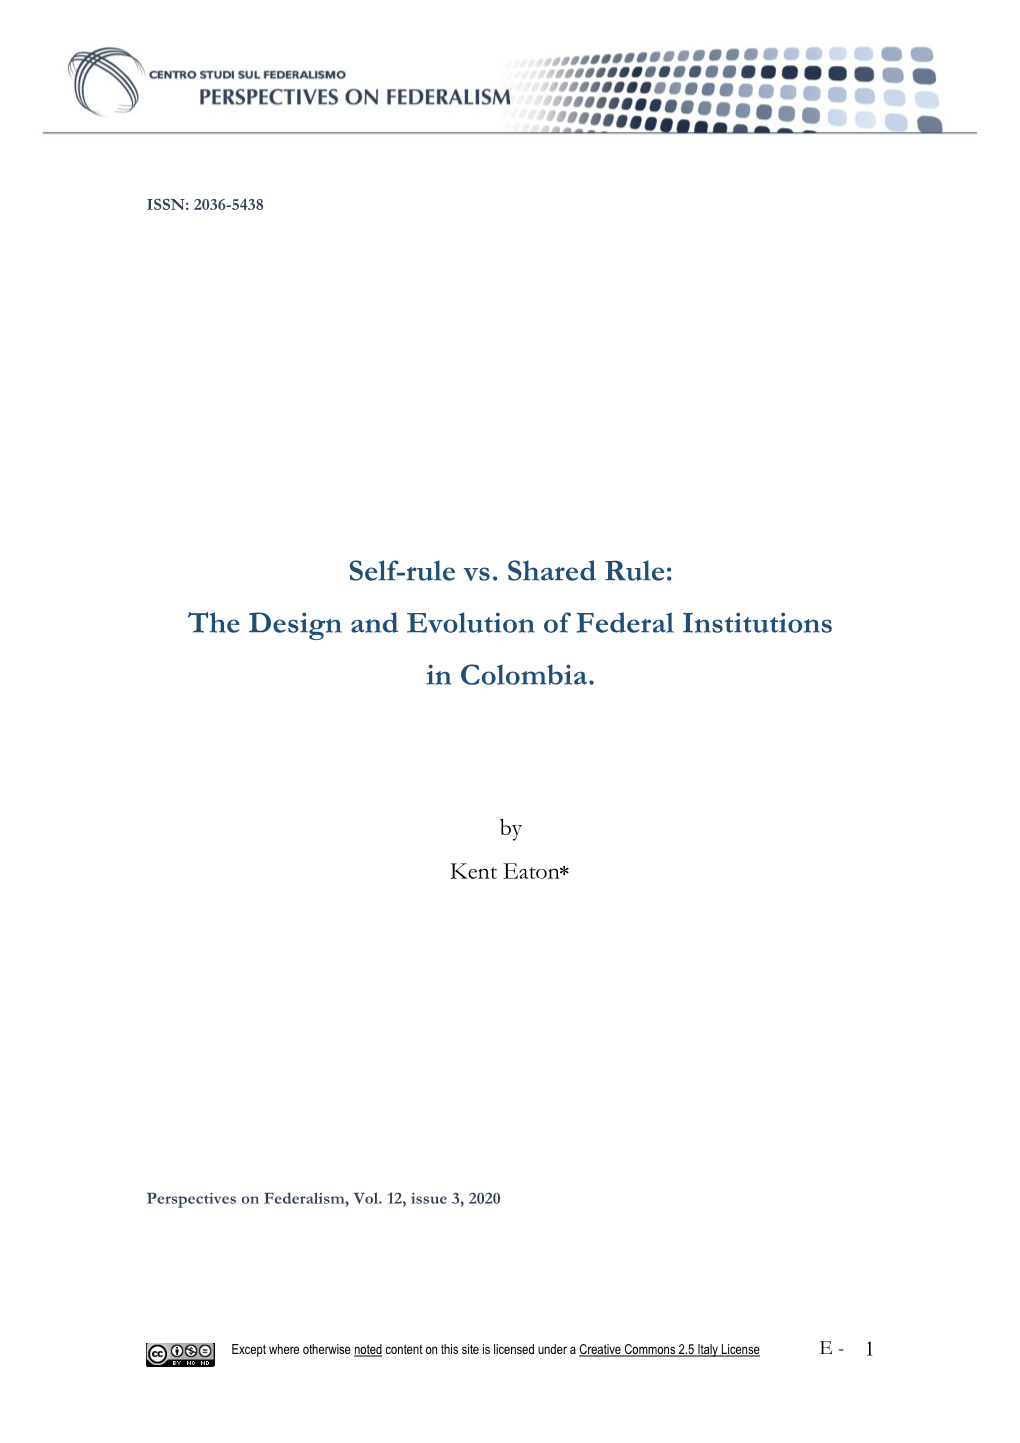 Self-Rule Vs. Shared Rule: the Design and Evolution of Federal Institutions in Colombia